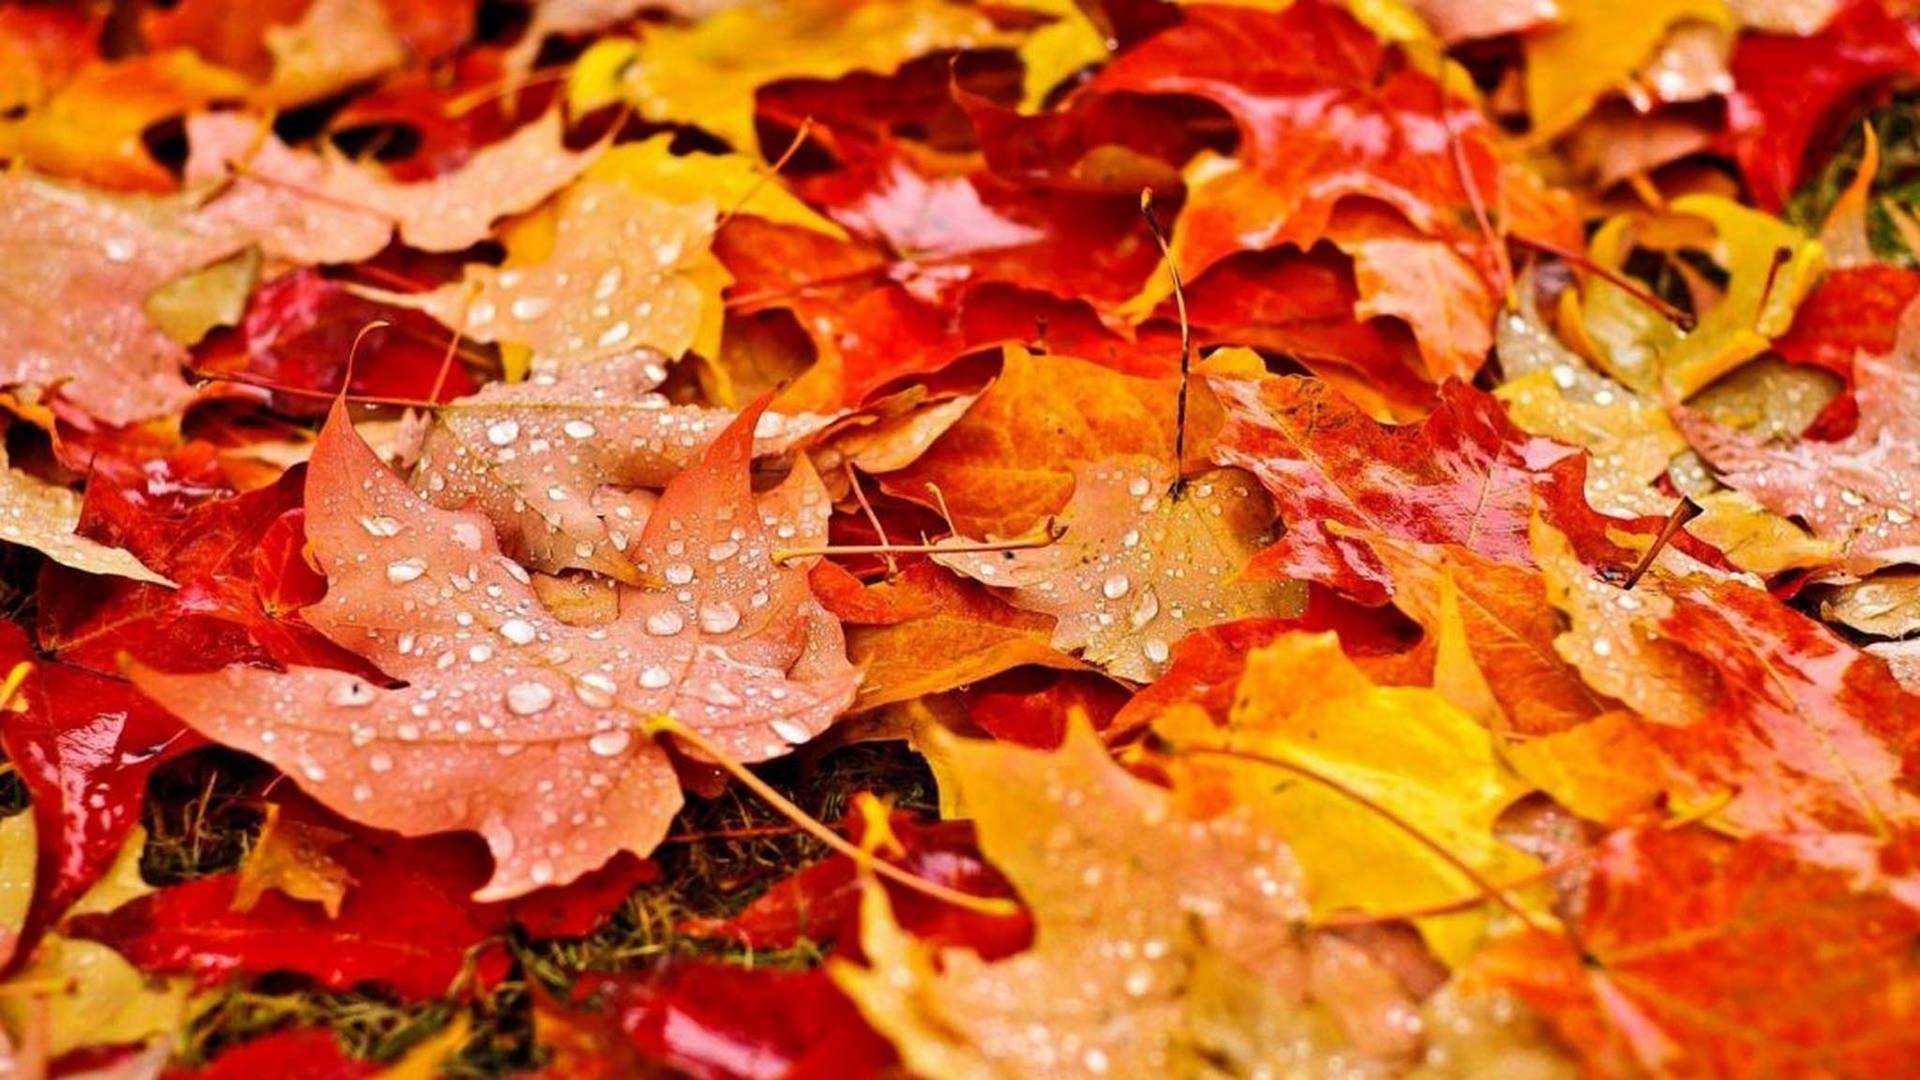 Autumn leaves with water droplets on the surface - Fall, cute fall